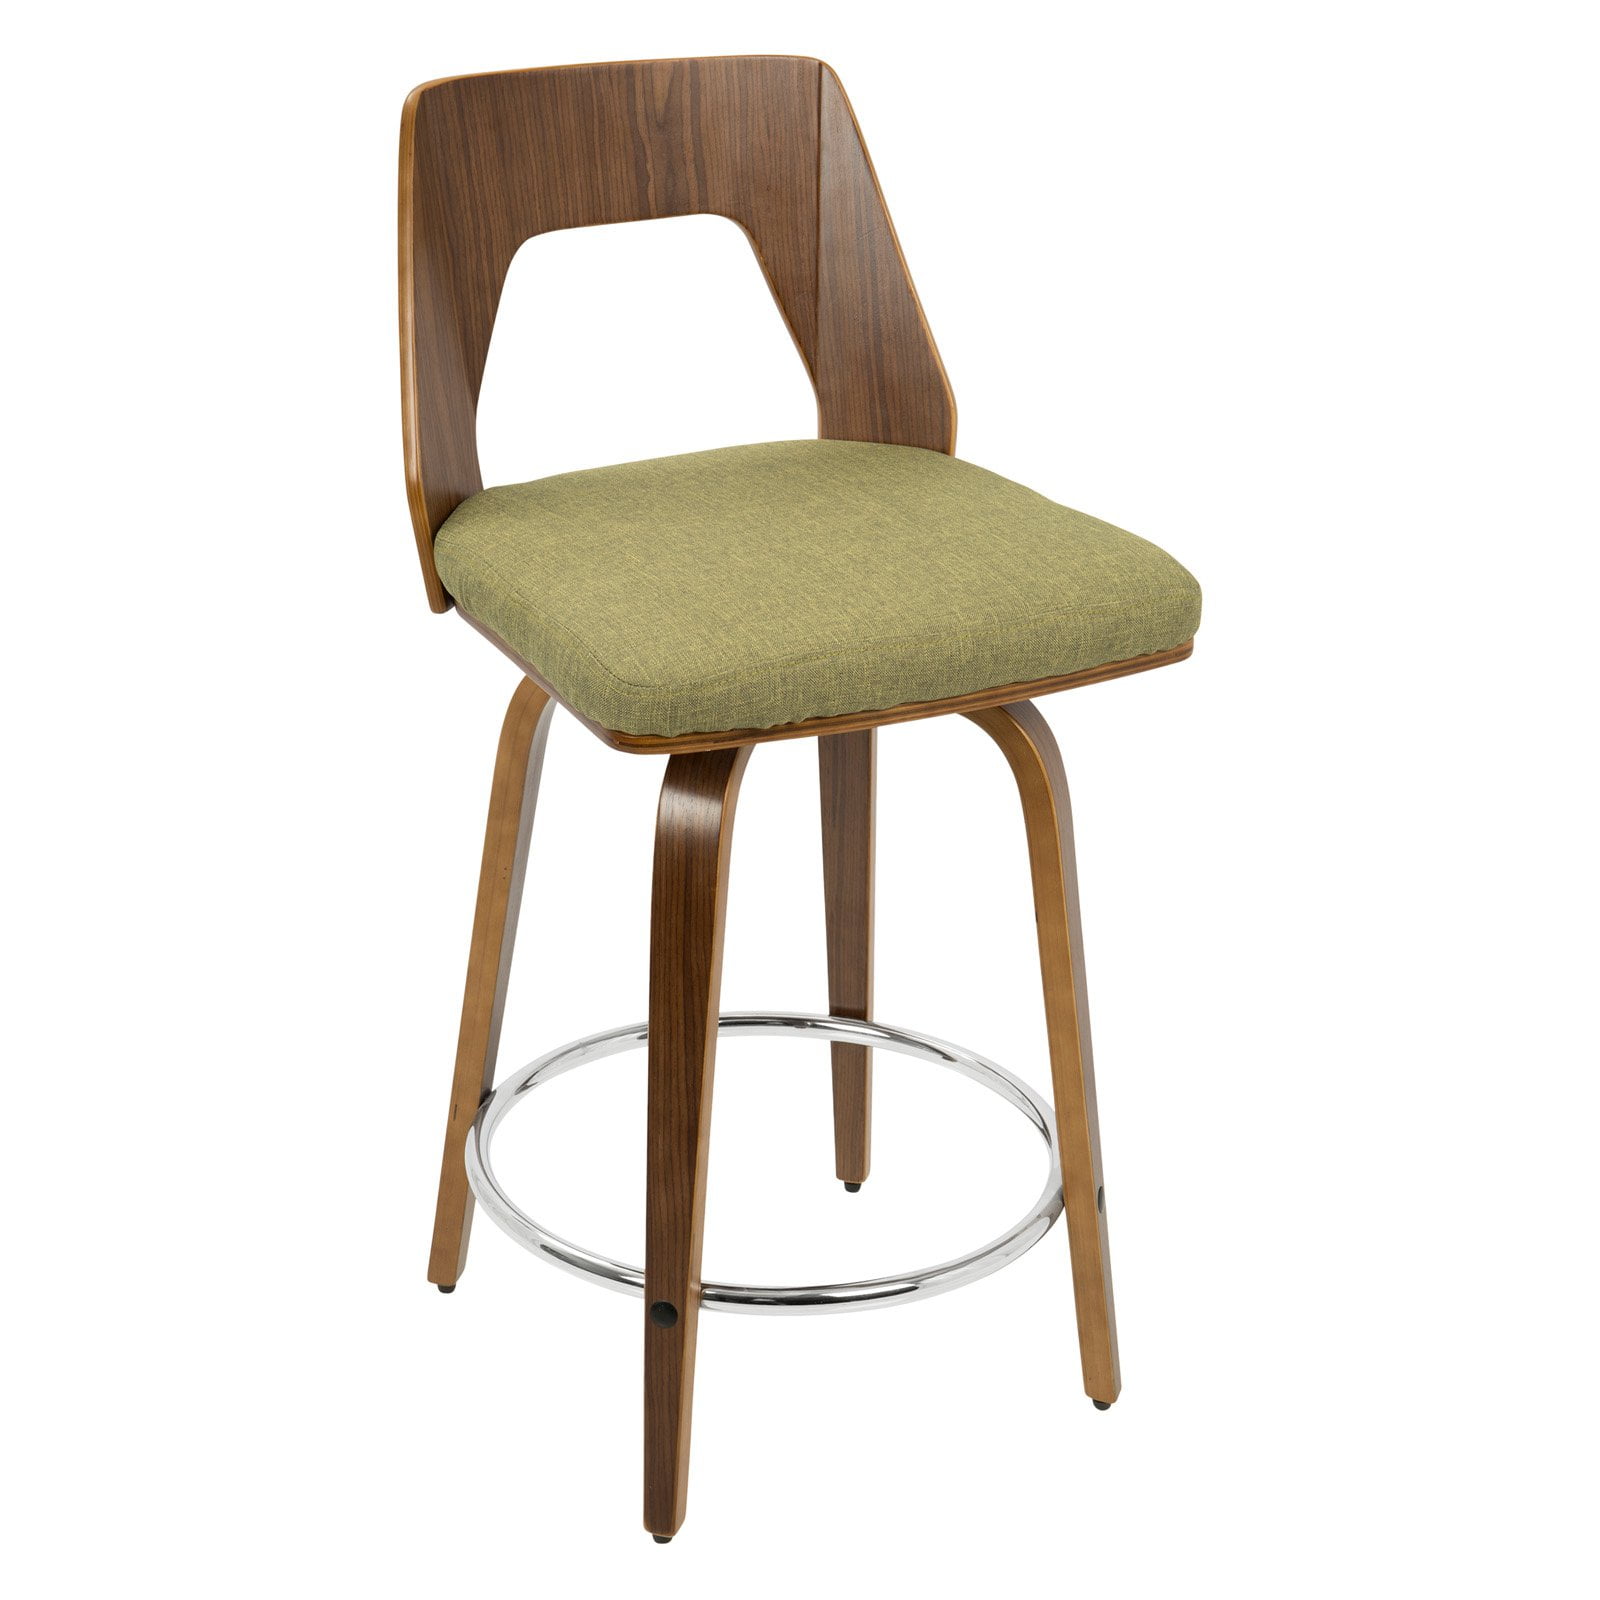 LumiSource Trilogy Counterstool, Multiple Colors Available - Walmart.com